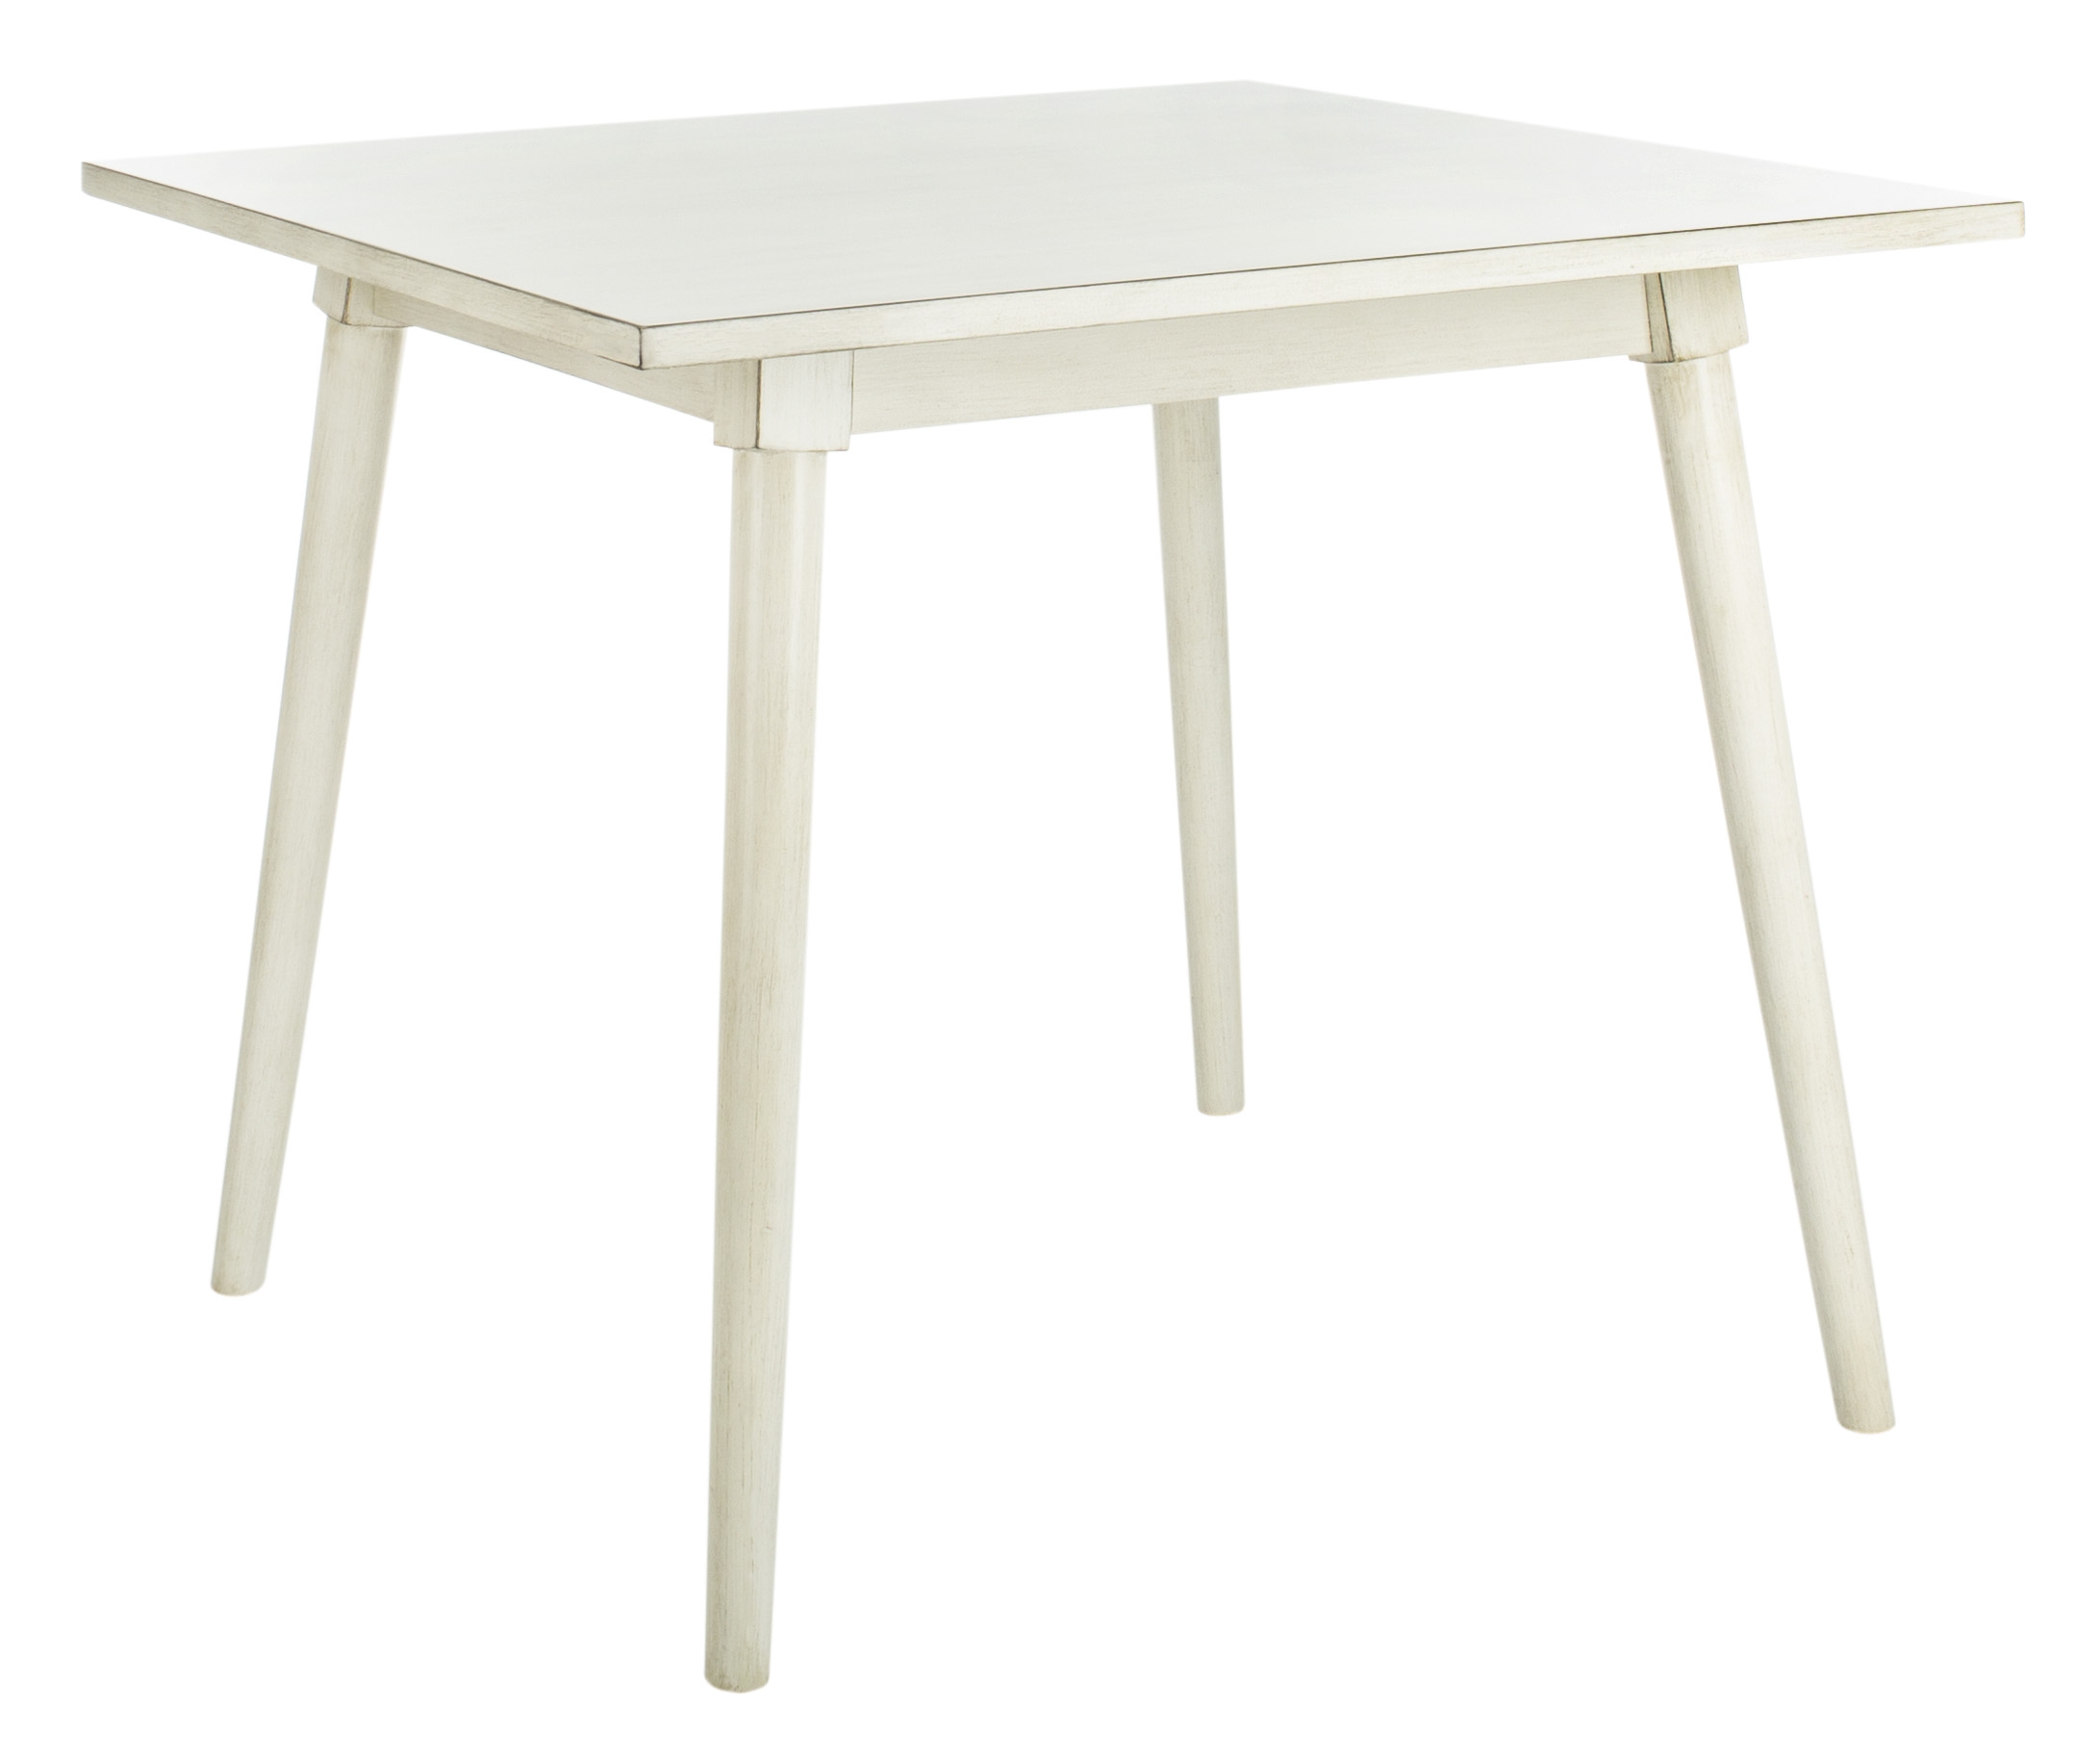 Simone Square Dining Table - Antique White - Arlo Home - Image 0